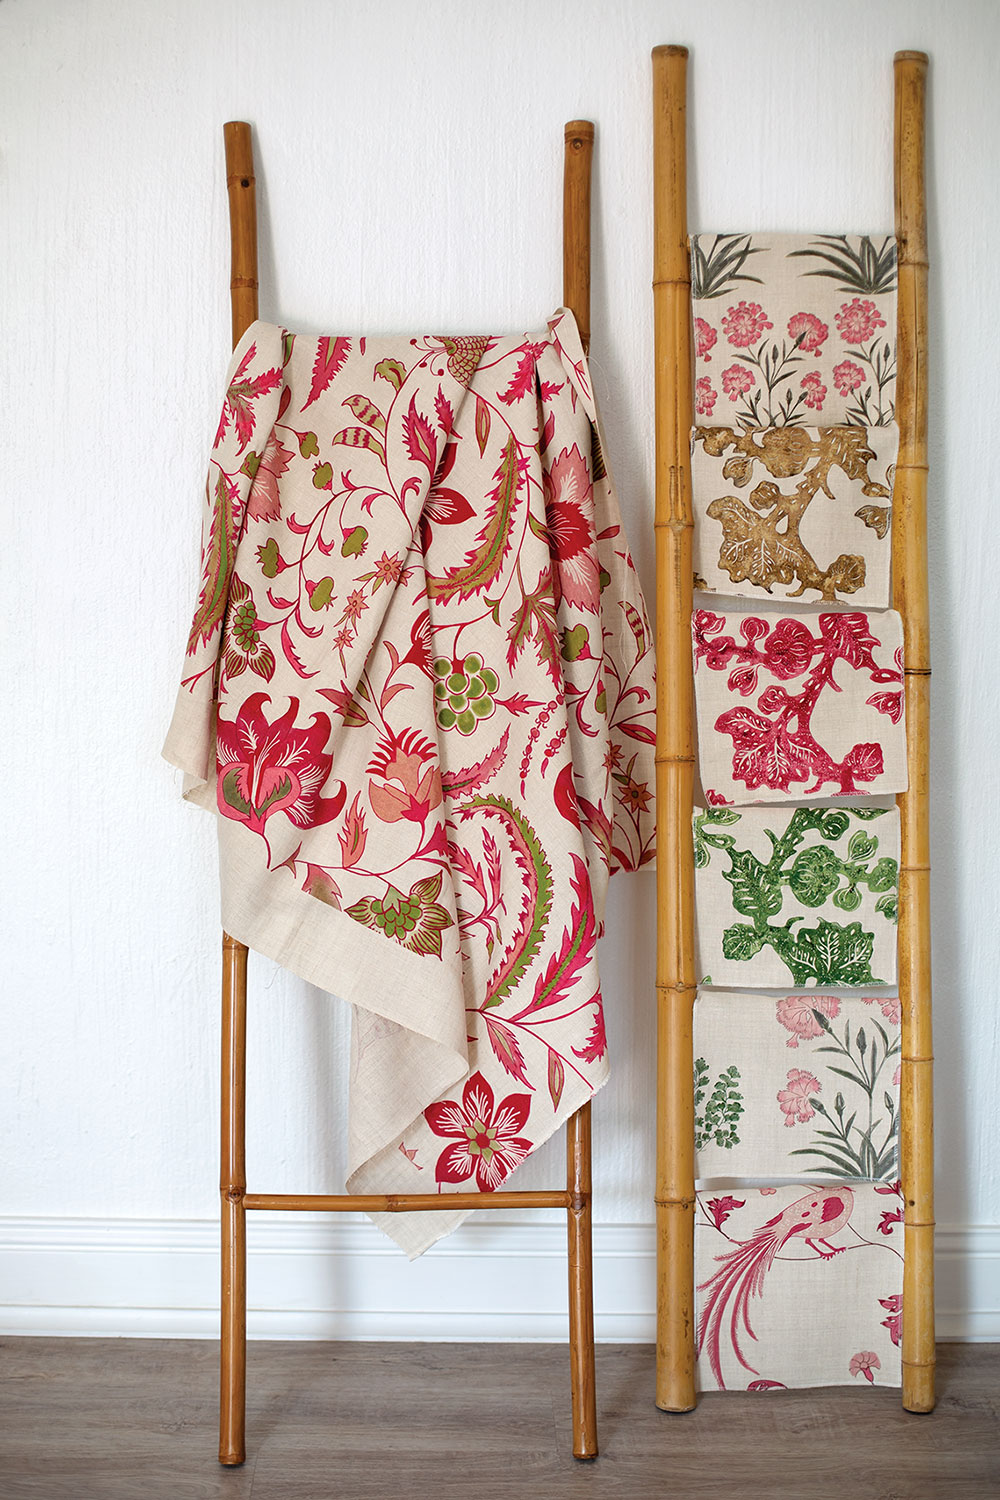 Assorted pink and green botanical print textiles, designed by Debby Tenquist of Botanica Trading, hang on bamboo display racks